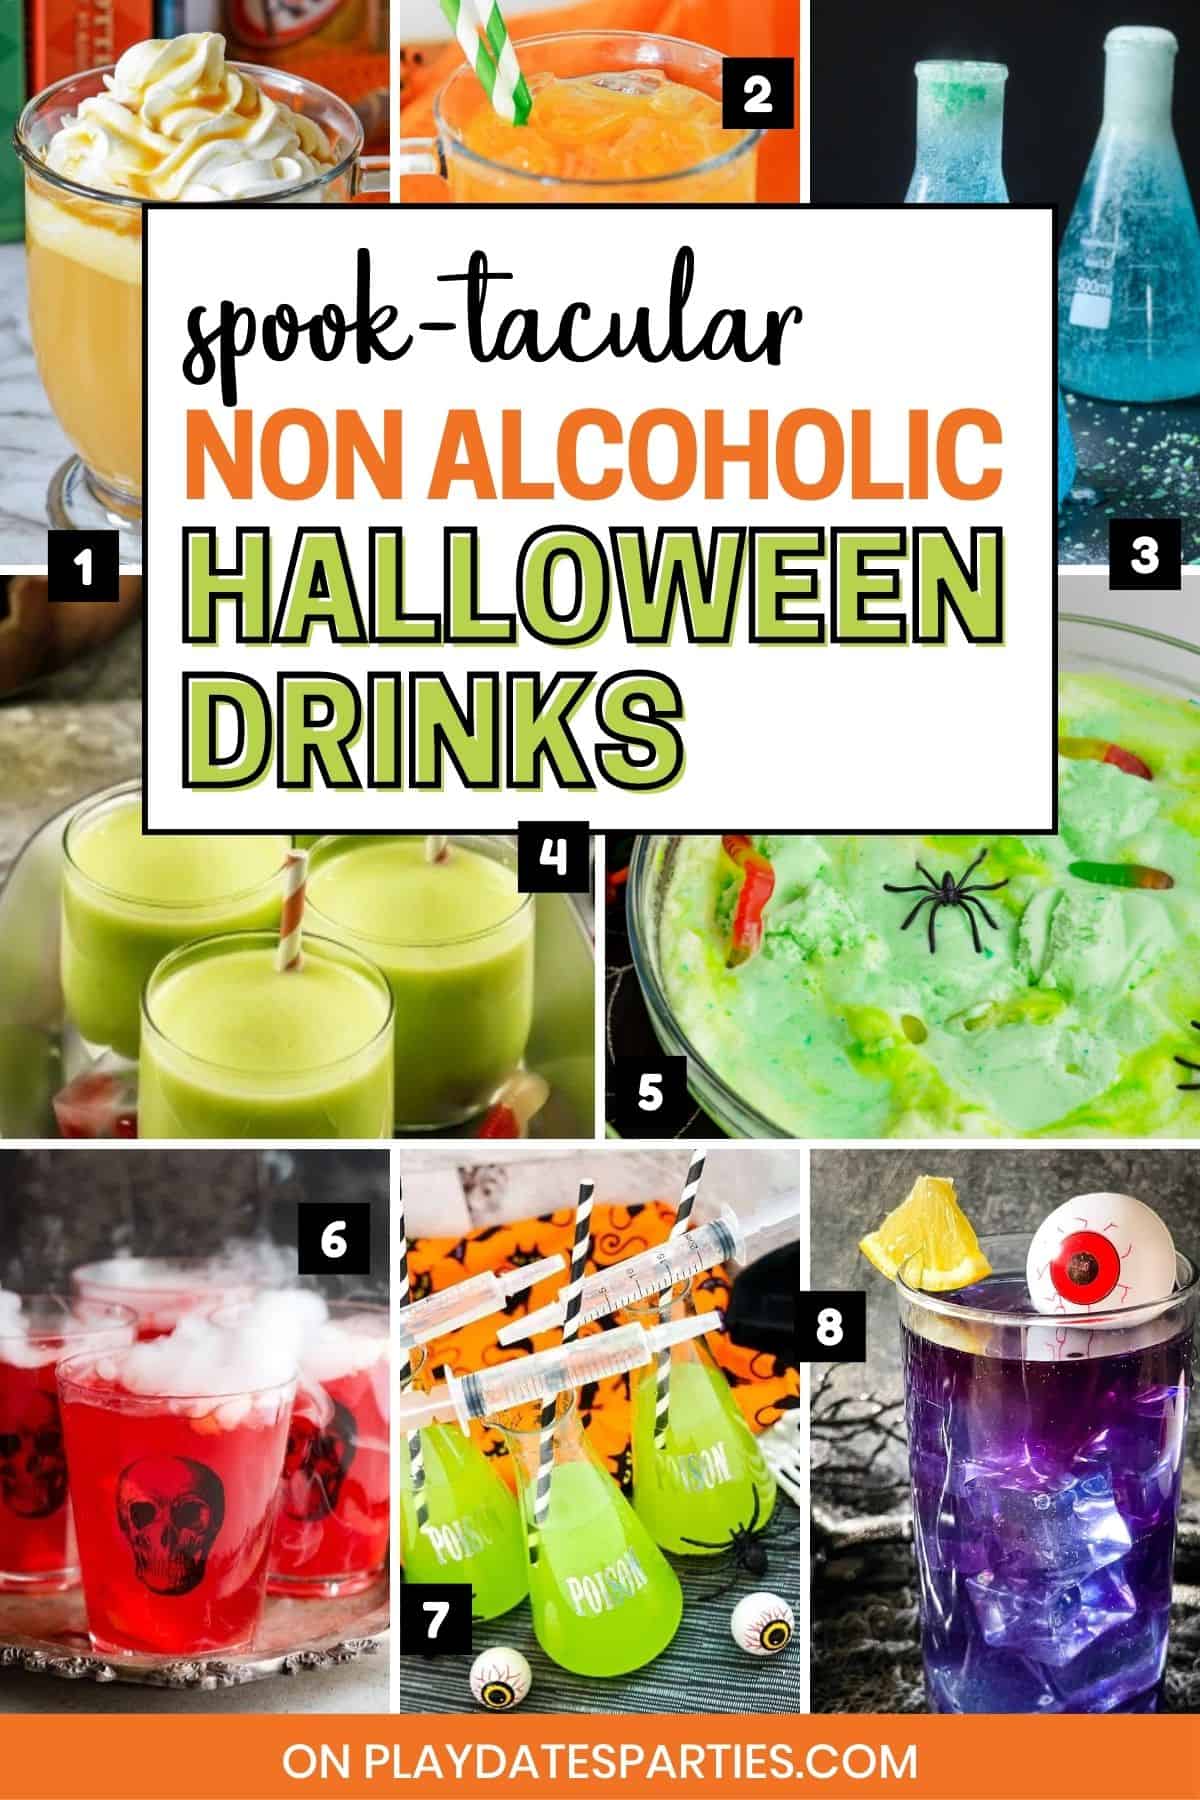 Spooktacular Non Alcoholic Halloween Mocktails for Kids Pin Image.